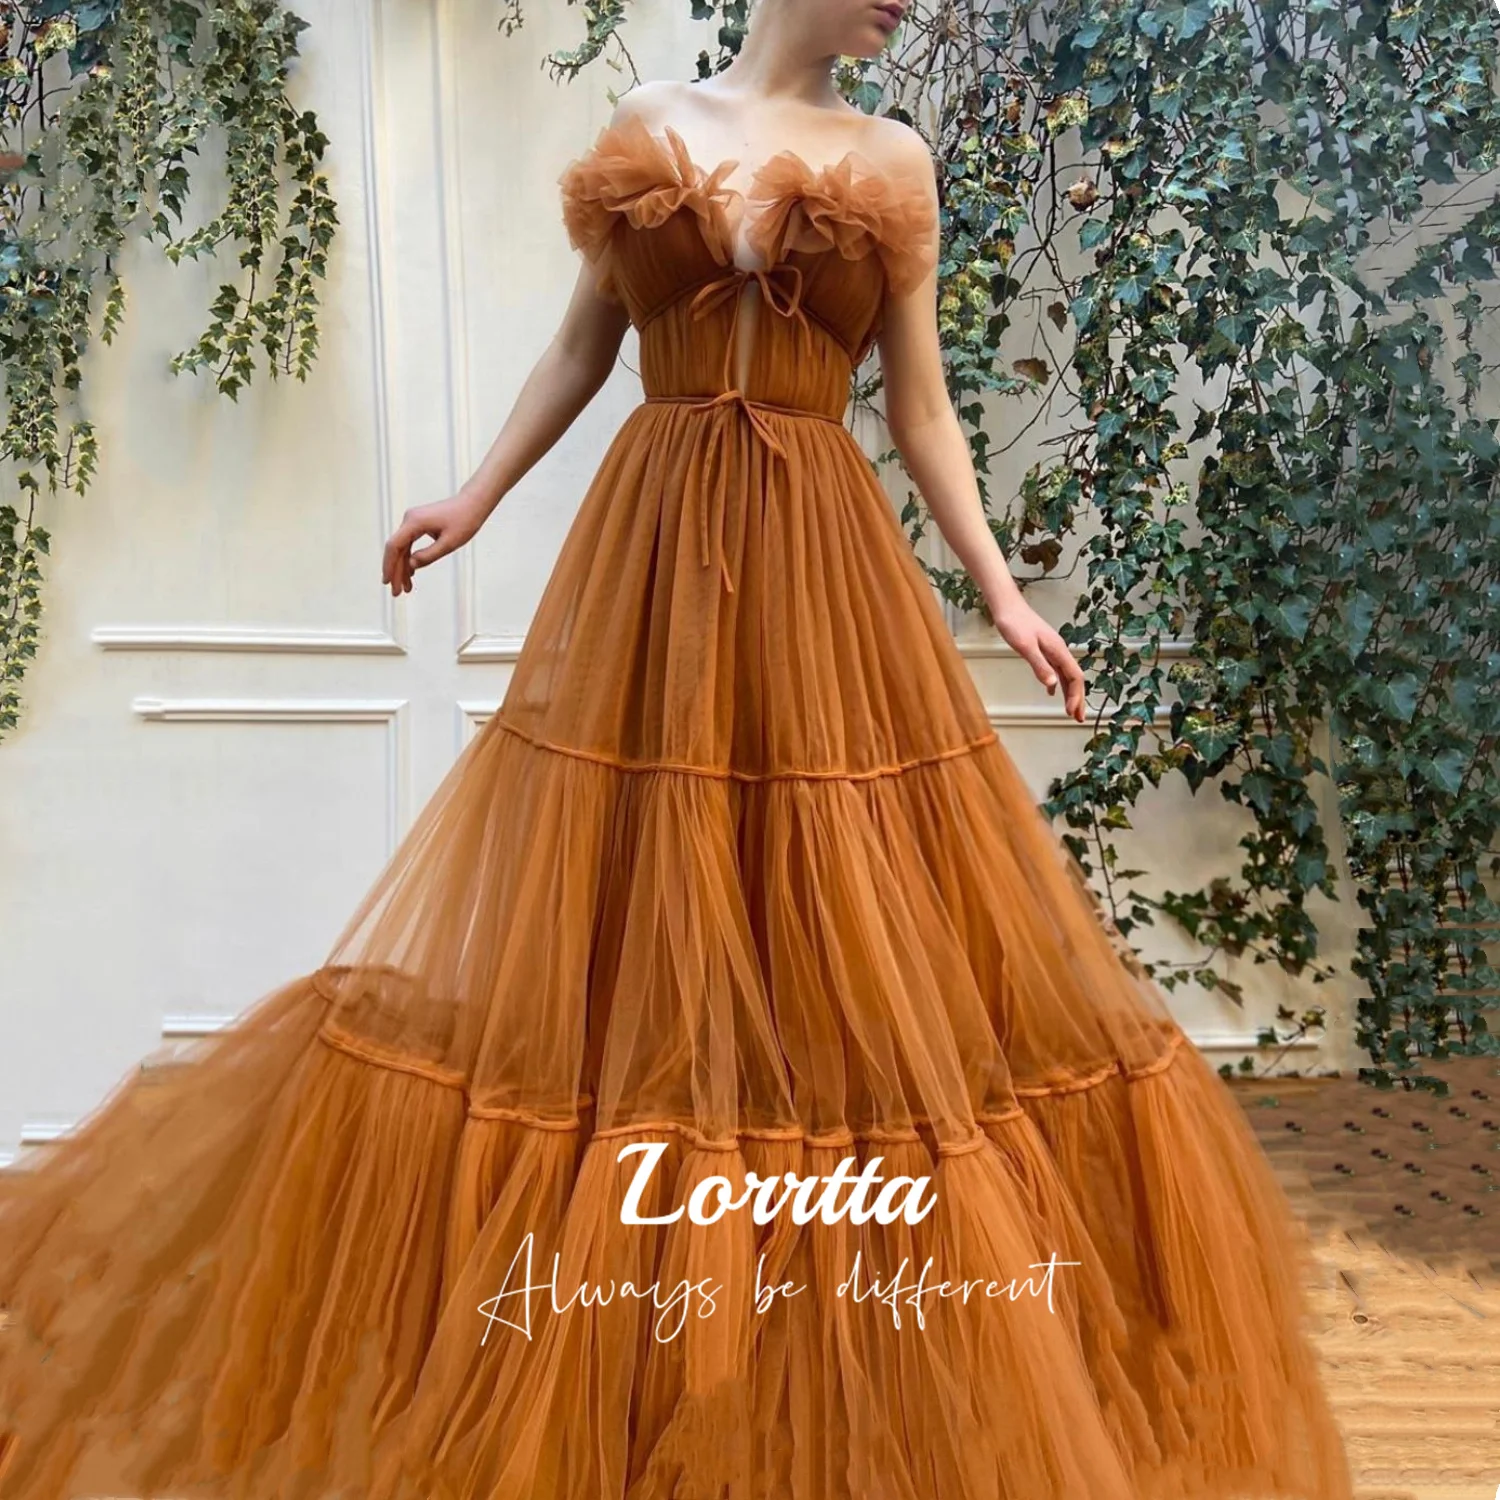 

Lorrtta Strapless Prom Dress Brown Tiered Prom Gown Sweet Sleeveless Sharon Happy Elegant and Pretty Women's Dresses Ball Gowns